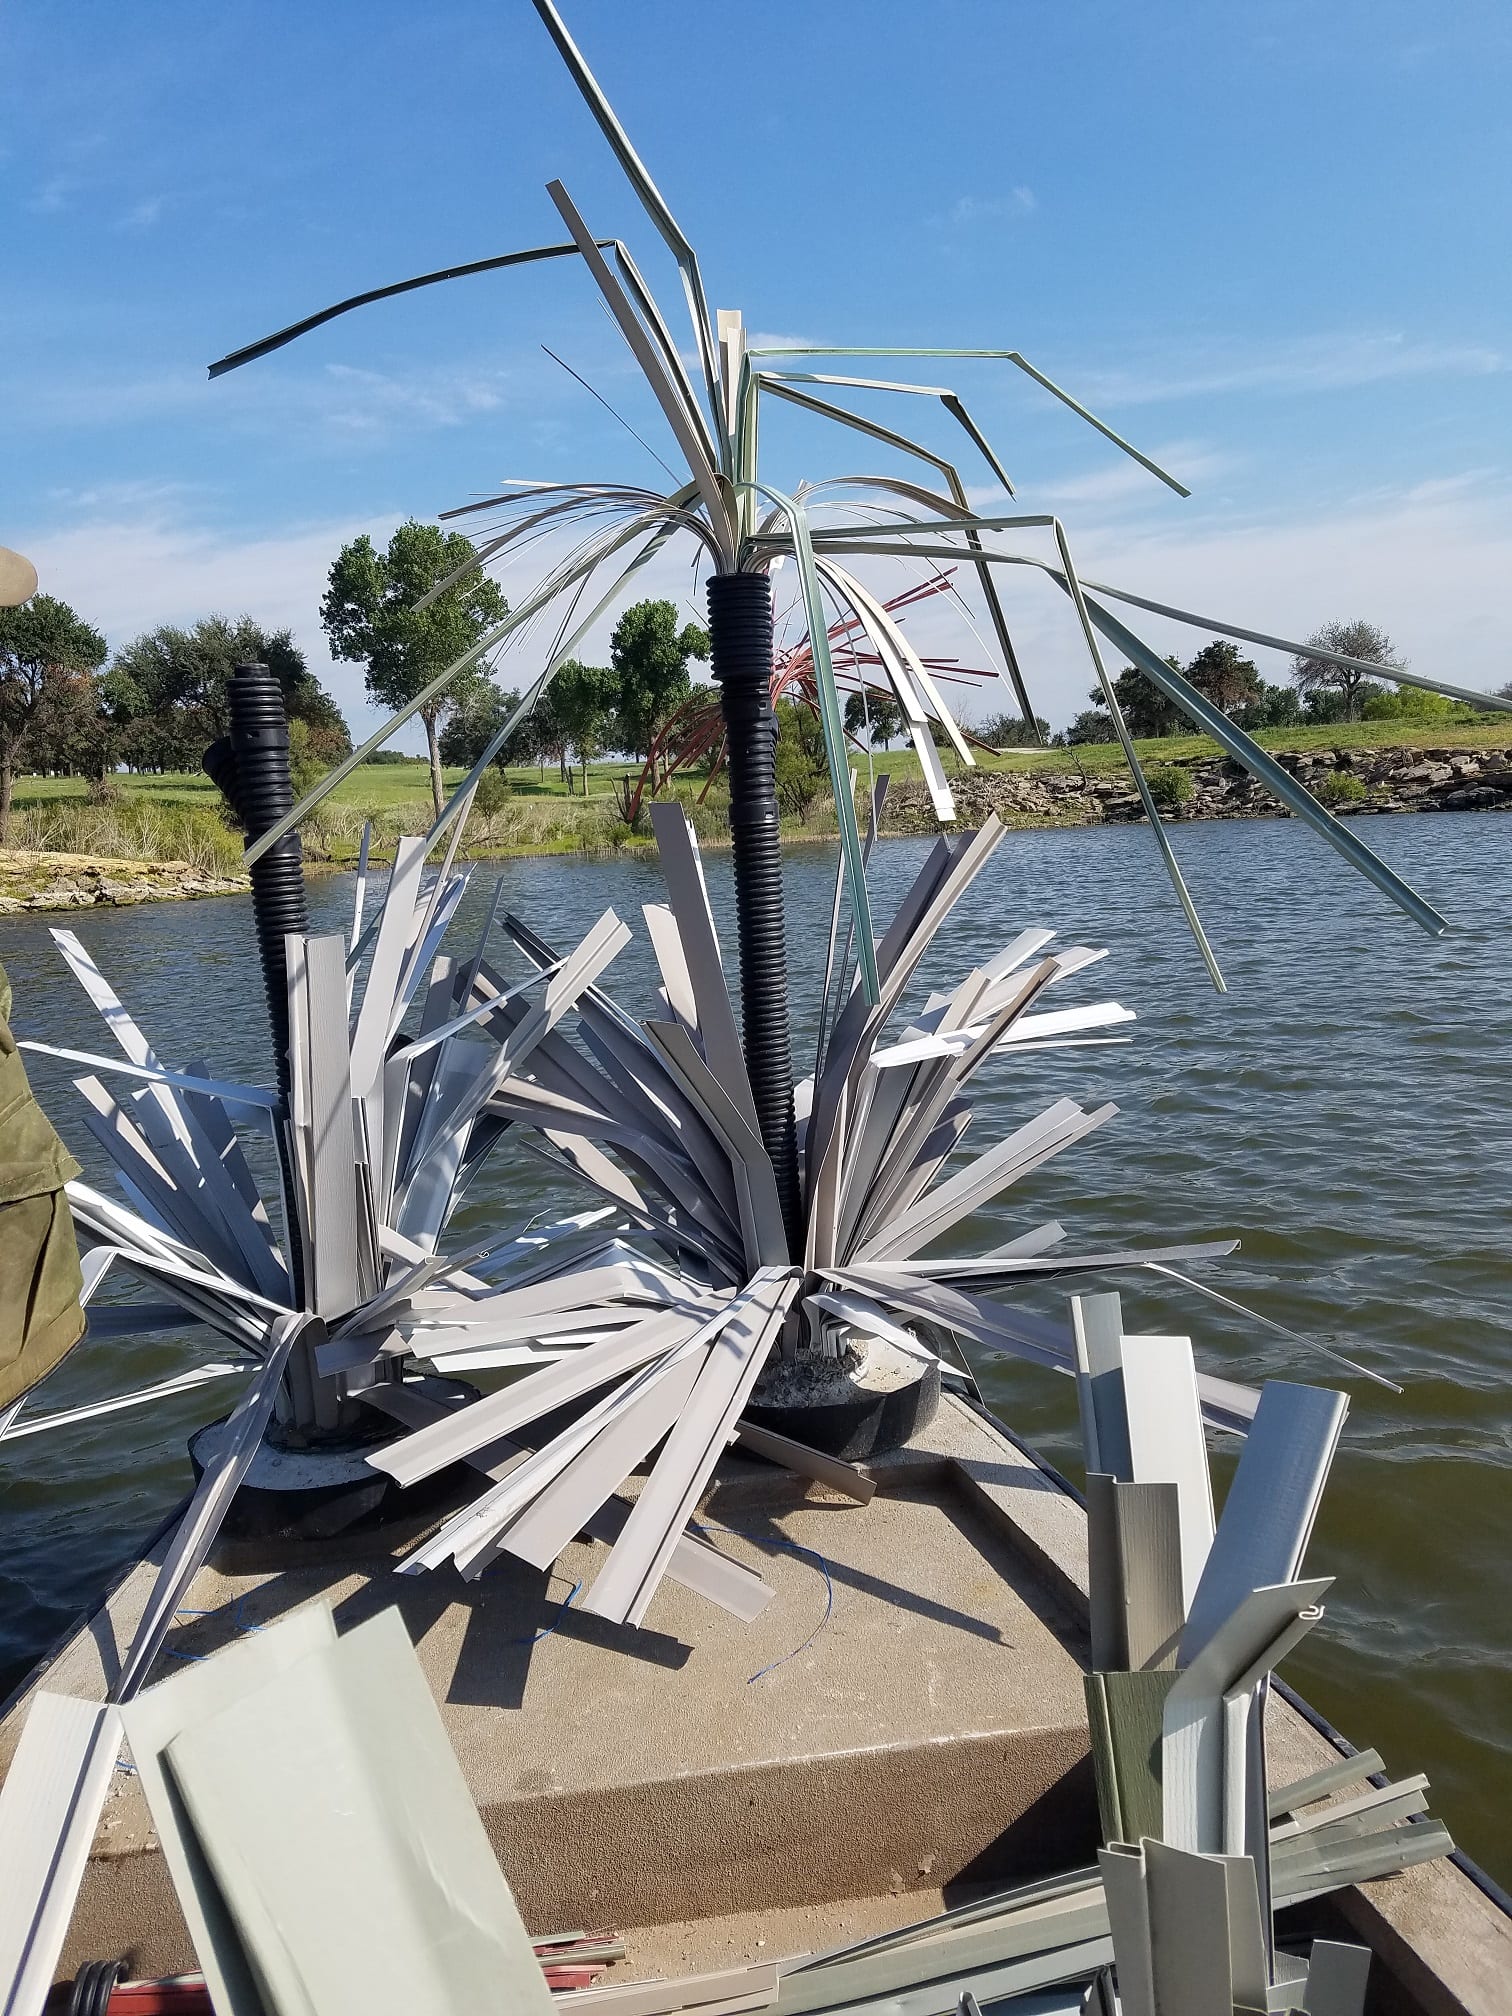 Fish attractors map it out for anglers - Texas Hunting & Fishing